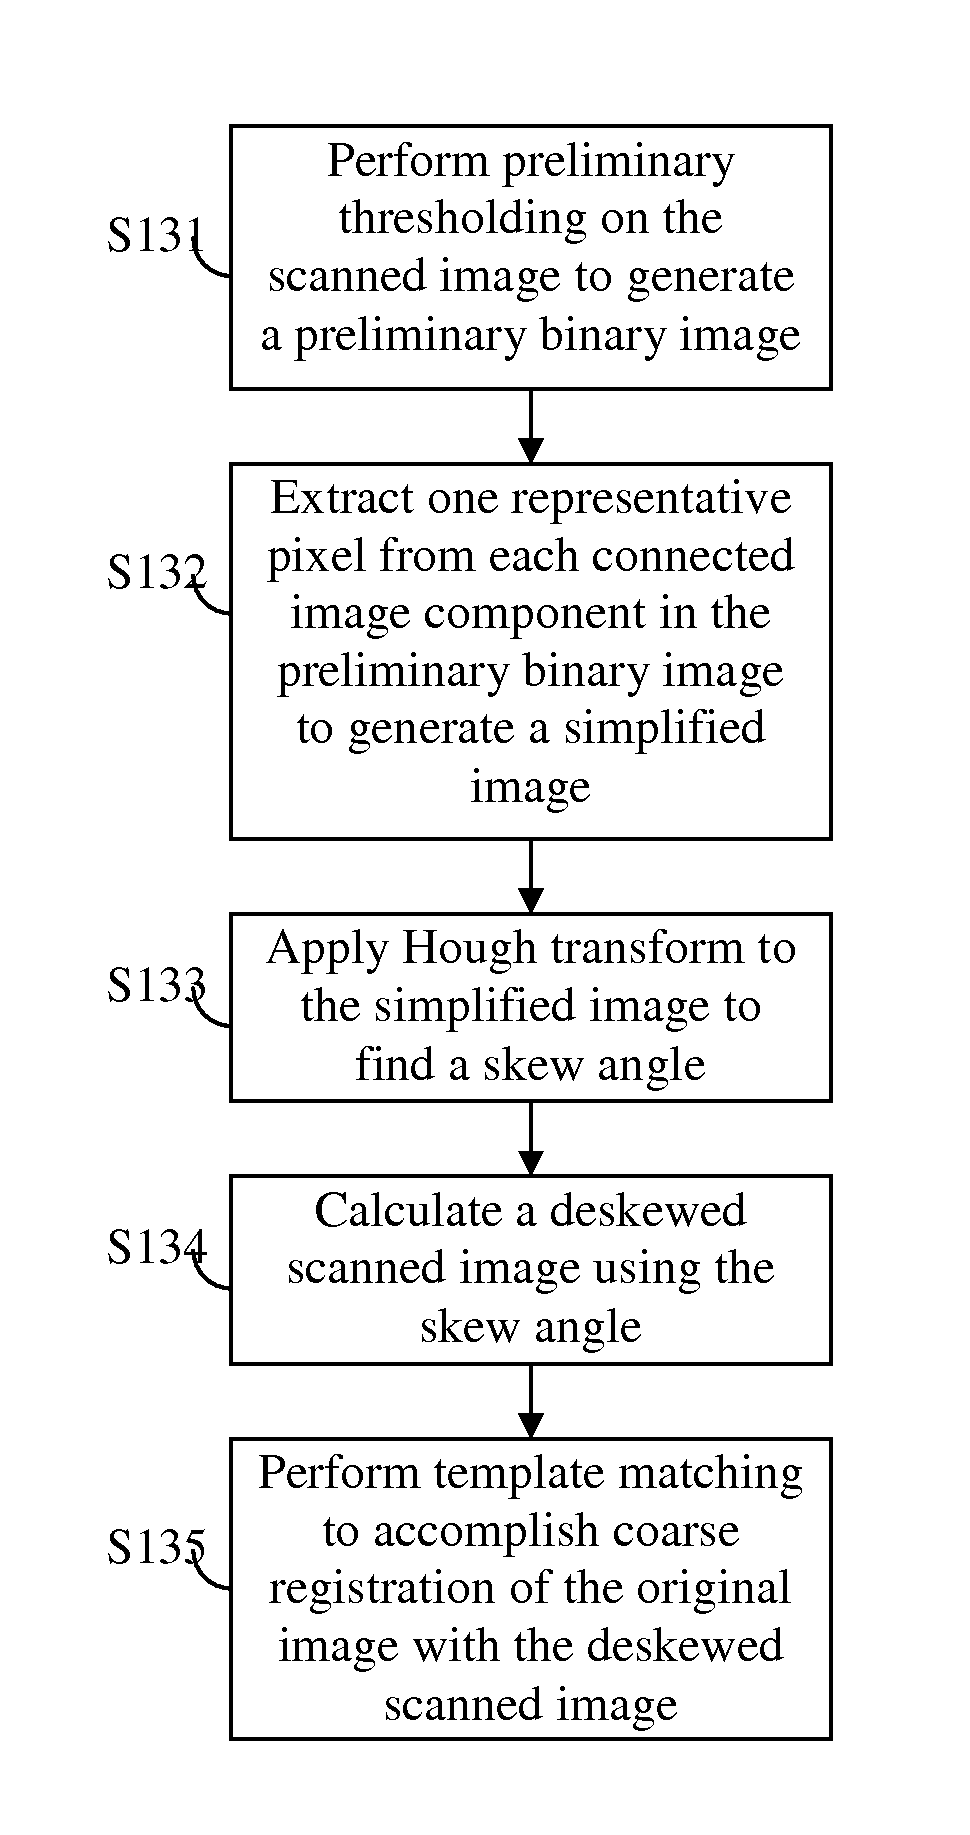 Deblurring and supervised adaptive thresholding for print-and-scan document image evaluation